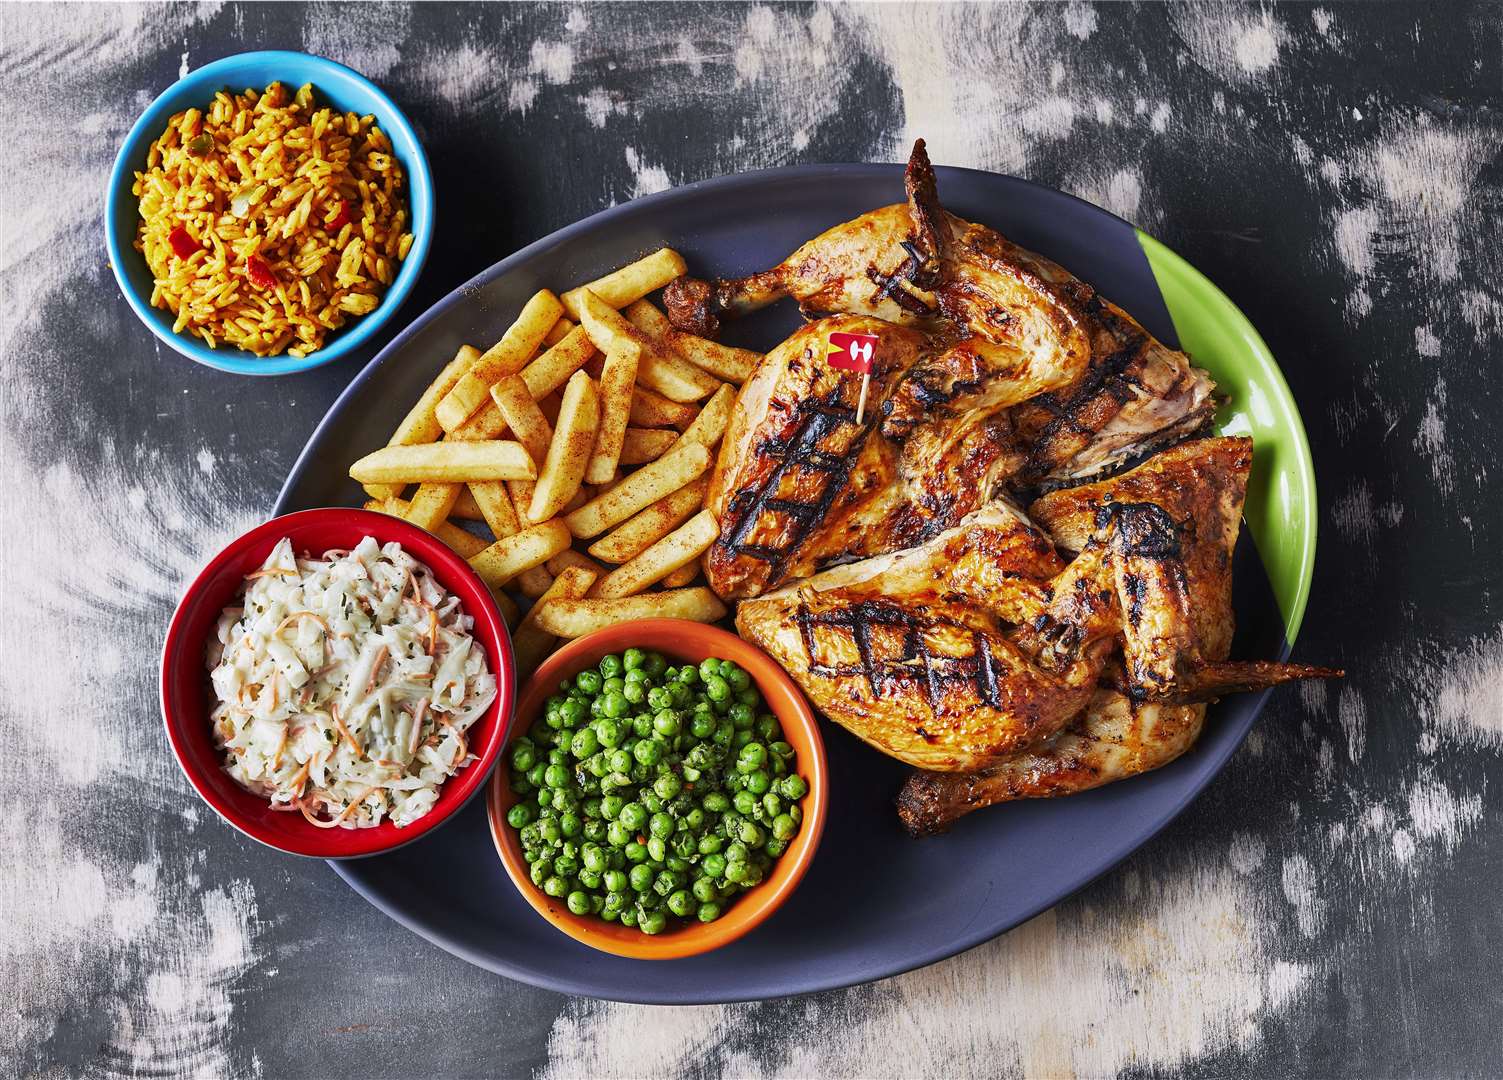 The full platter from Nando's. Picture: Nando's UK